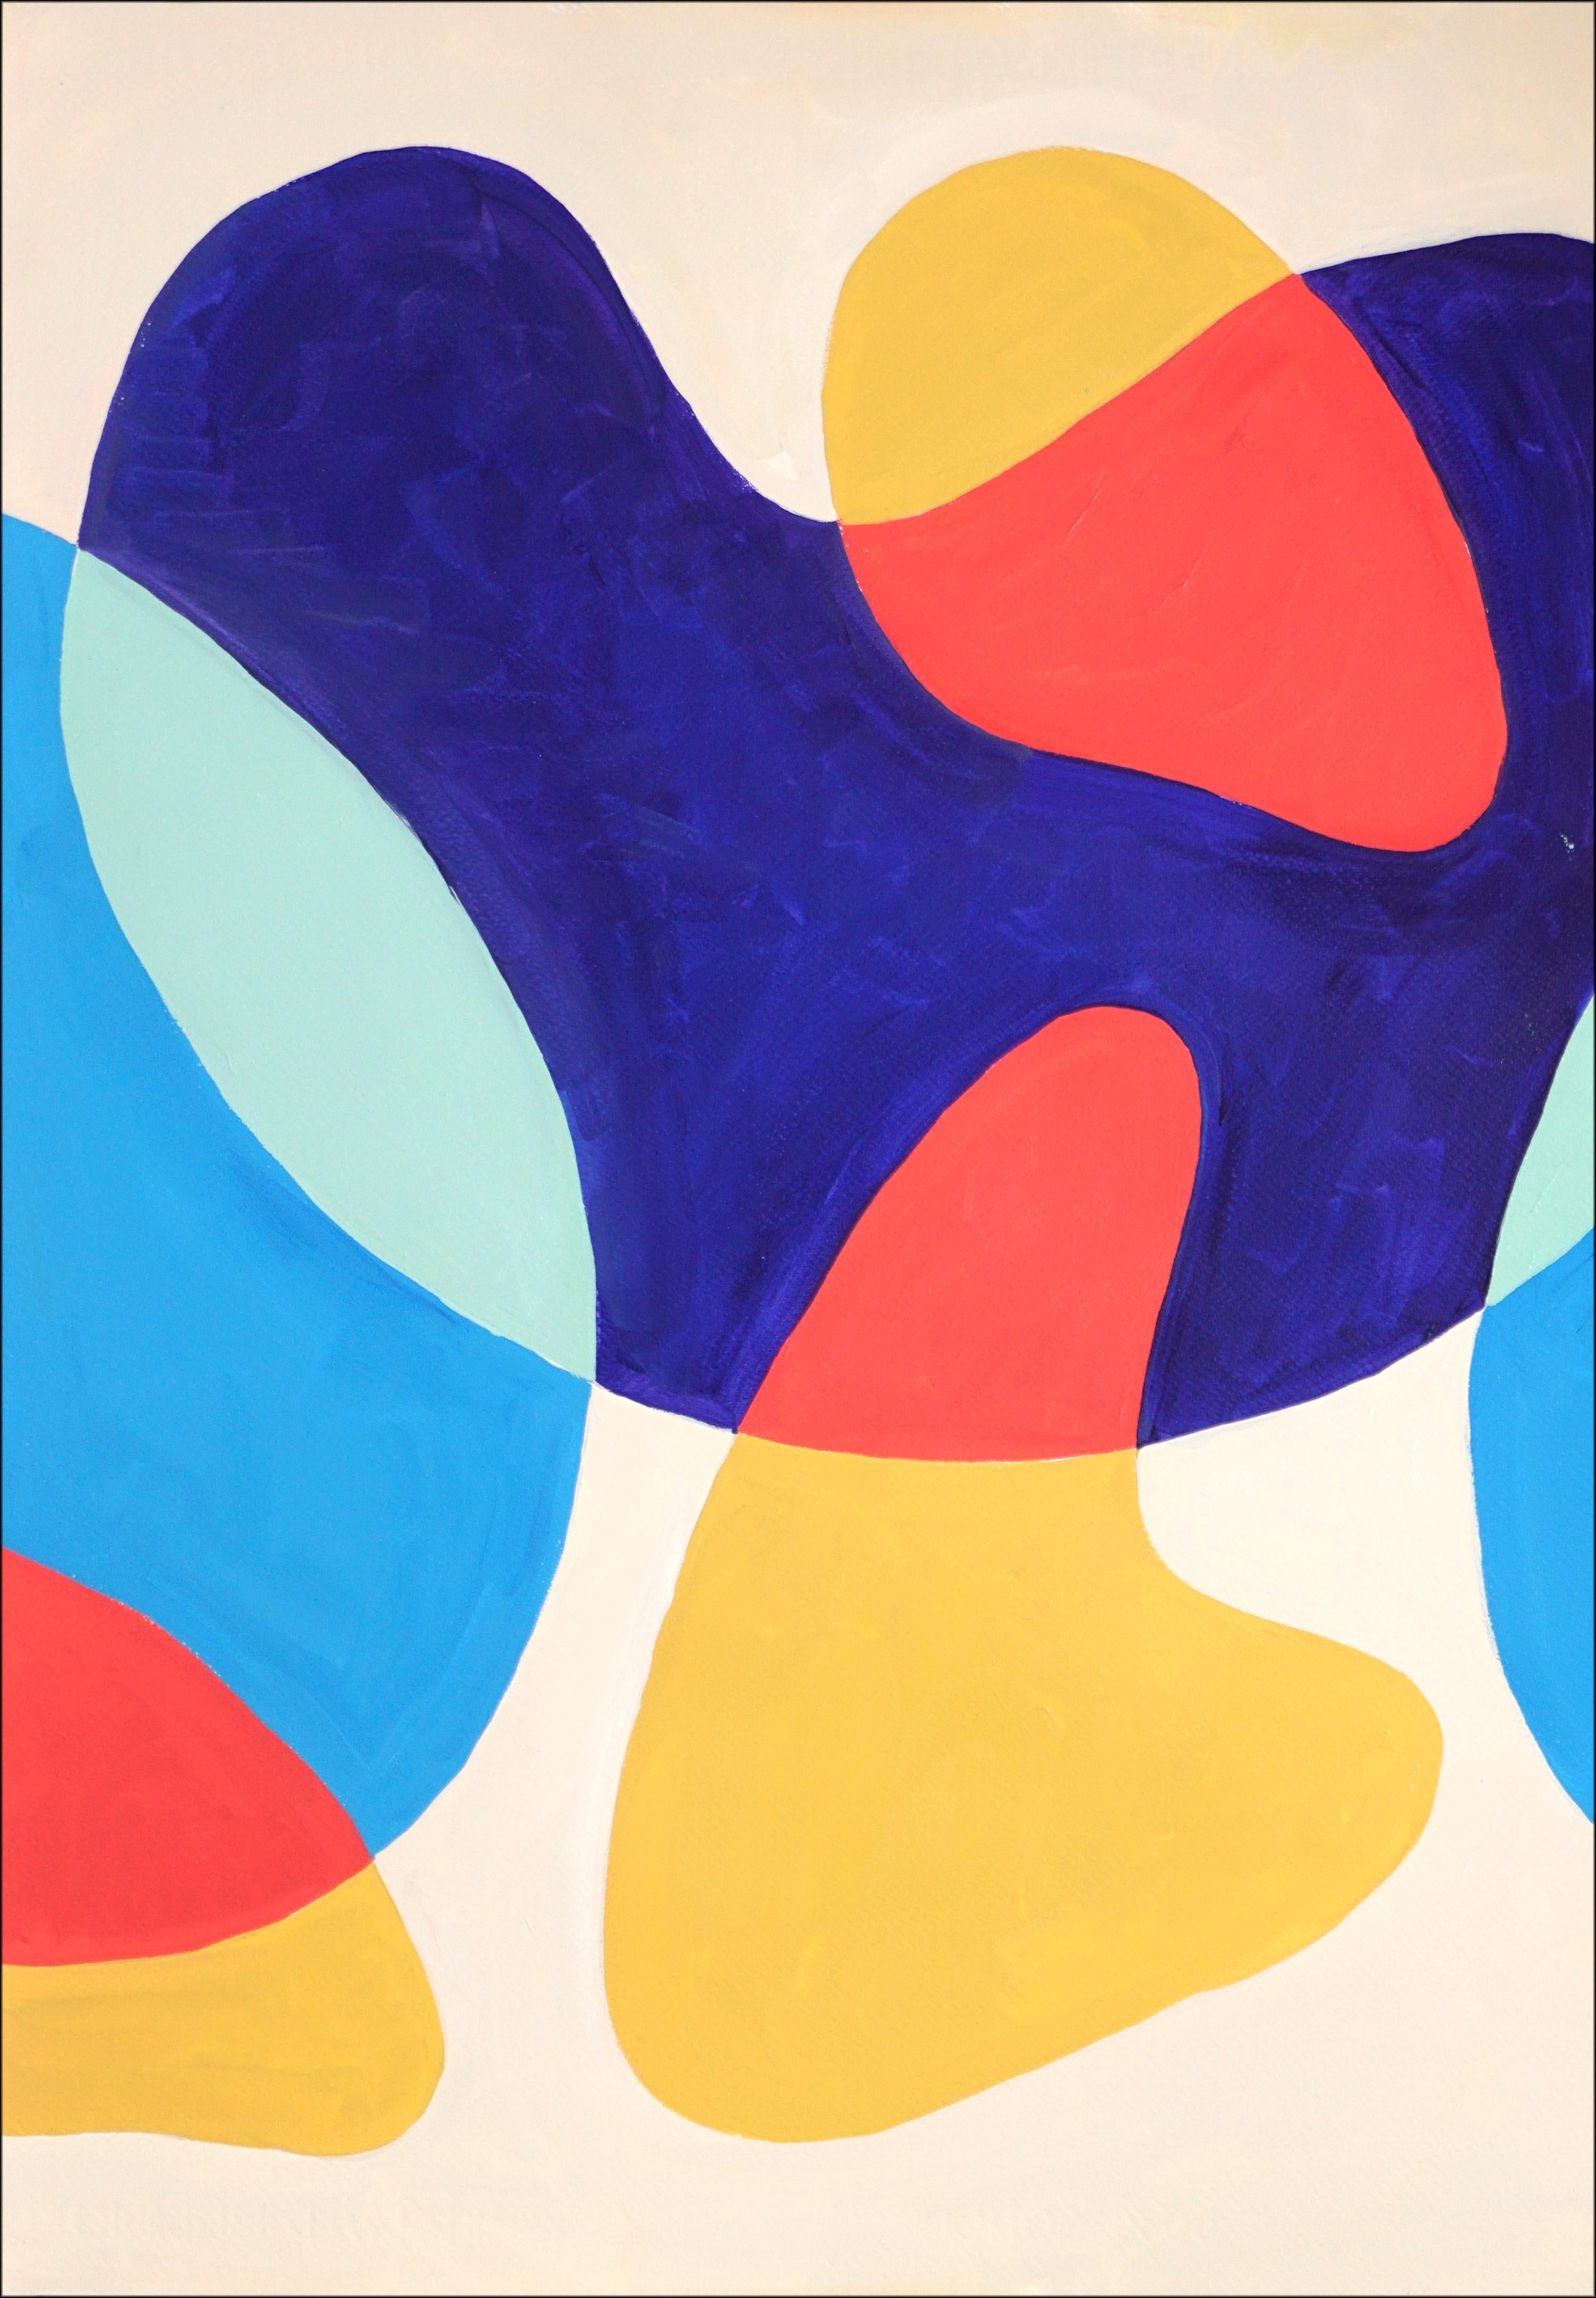 Swimming Pools in The Desert, Abstract Modern Shapes in Primary Tones, Triptych 1